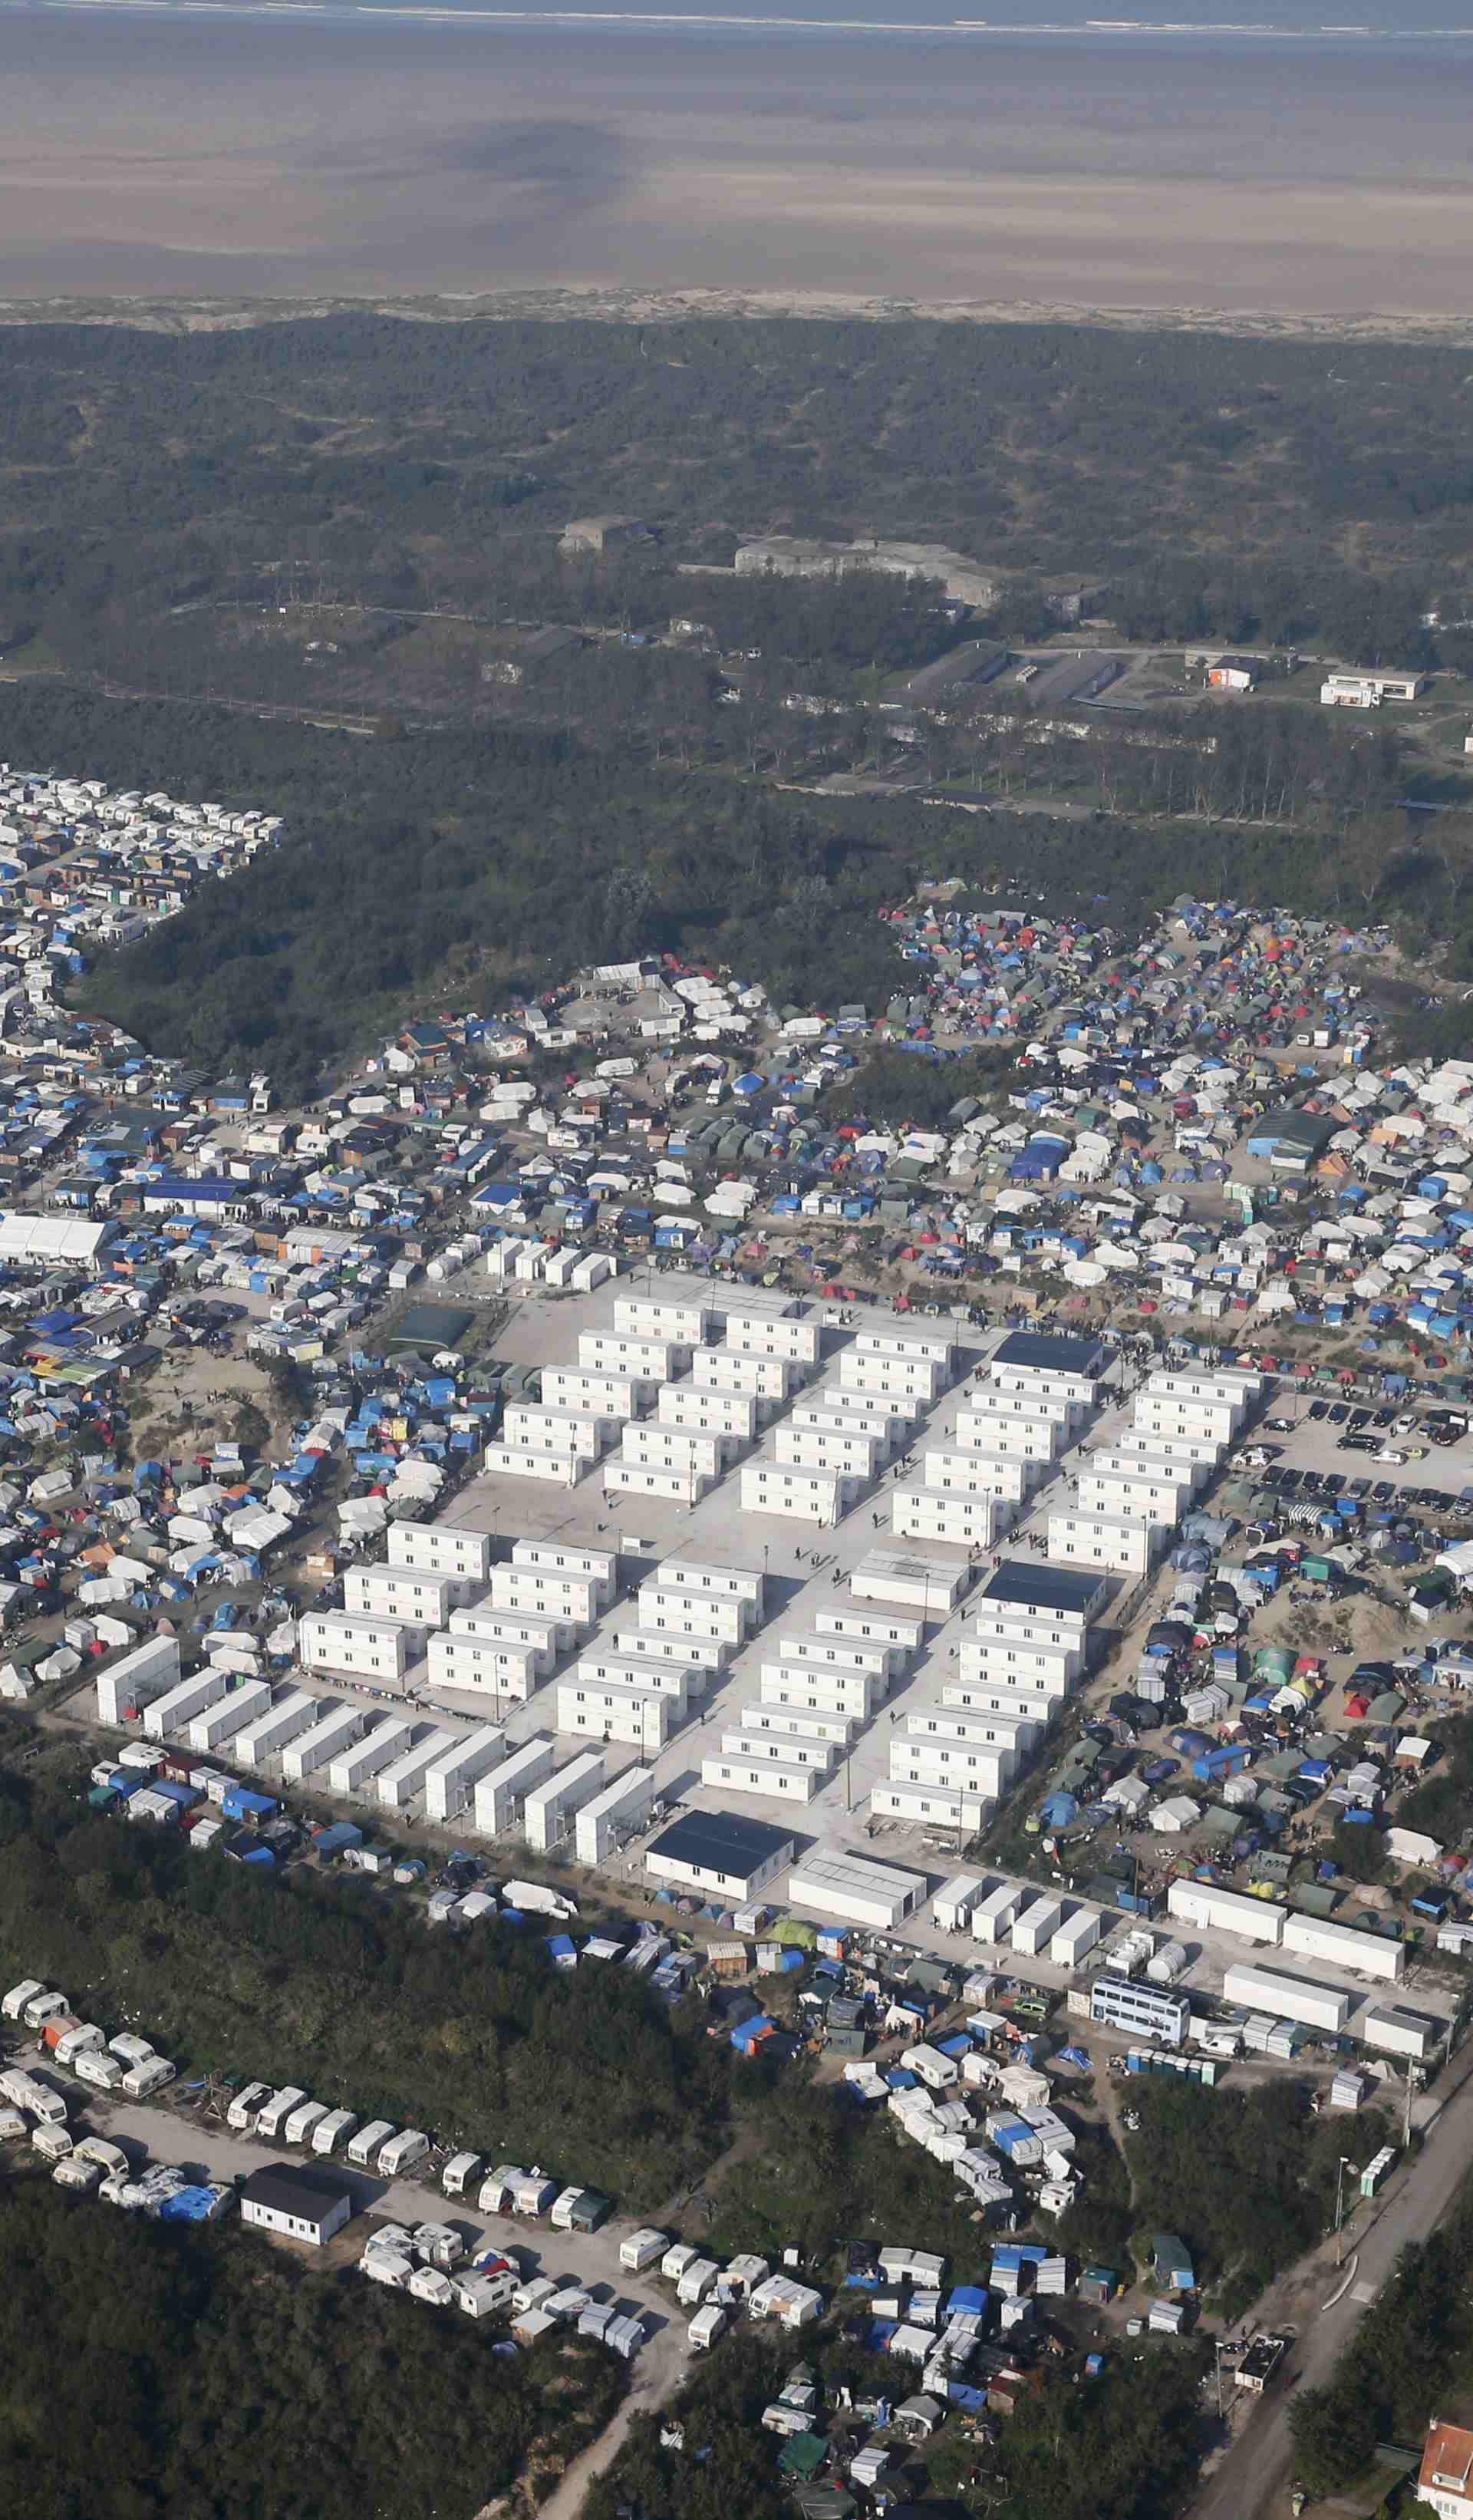 An aerial view shows white containters, tents and makeshift shelters on the eve of the evacuation and dismantlement of the camp called the "Jungle" in Calais